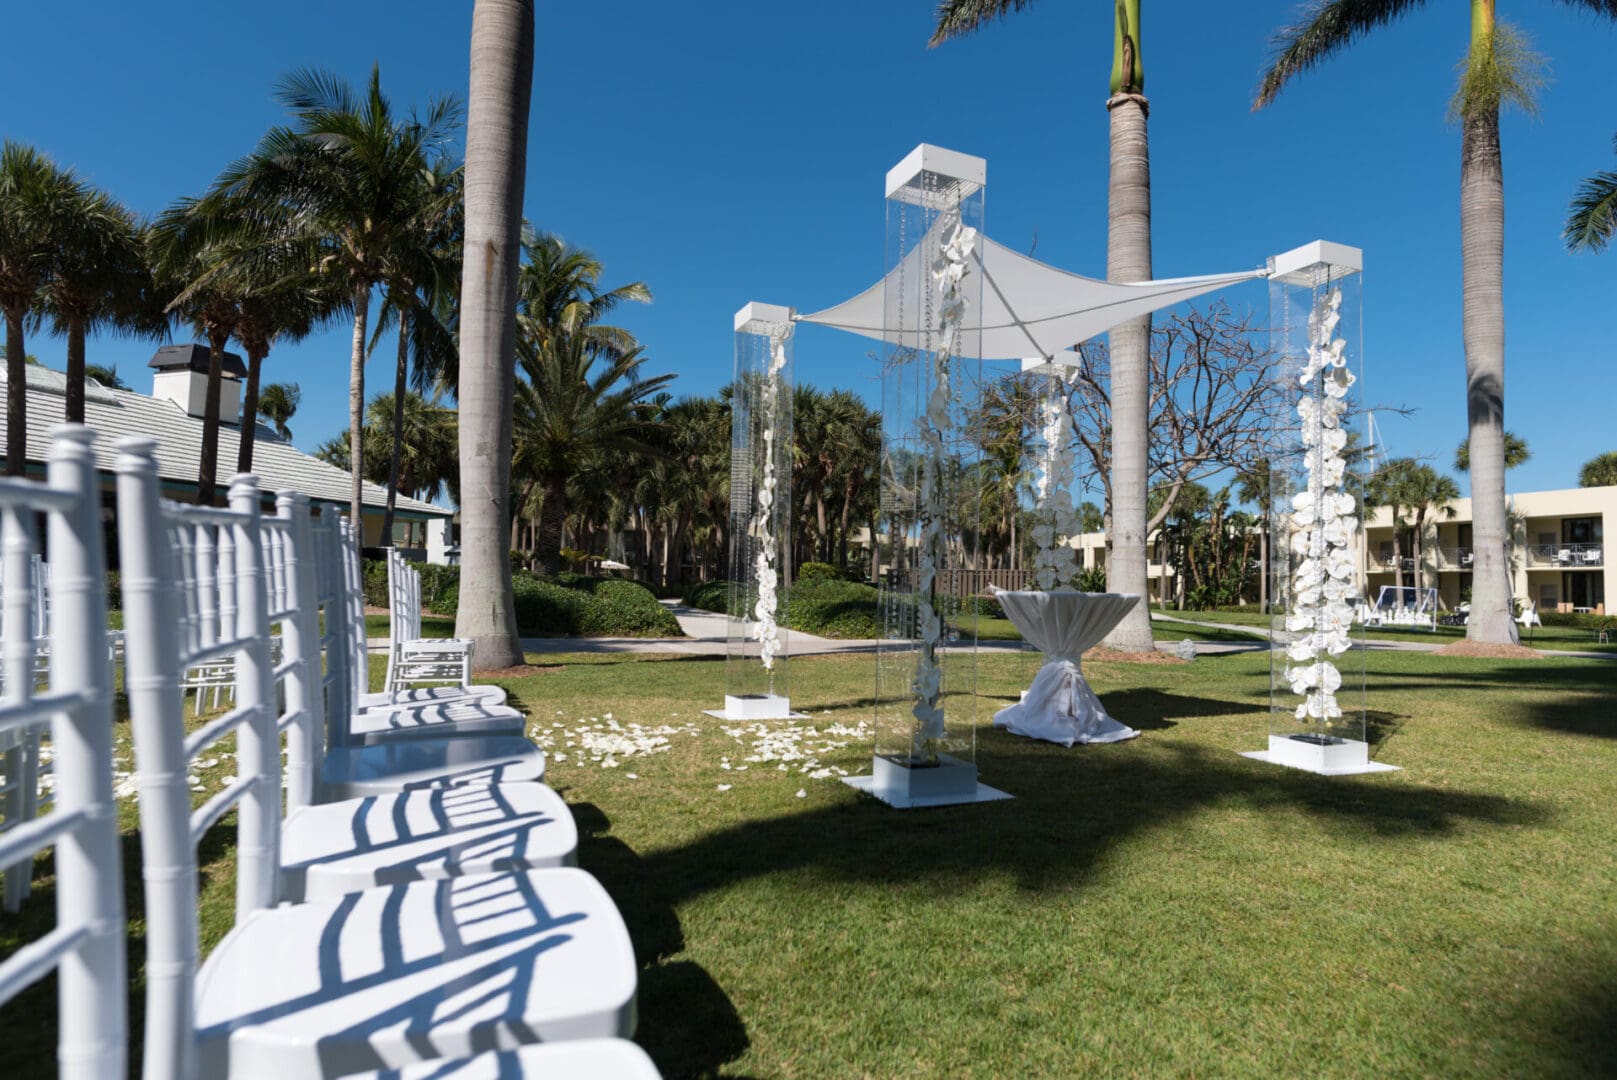 A white gazebo with palm trees in the background.